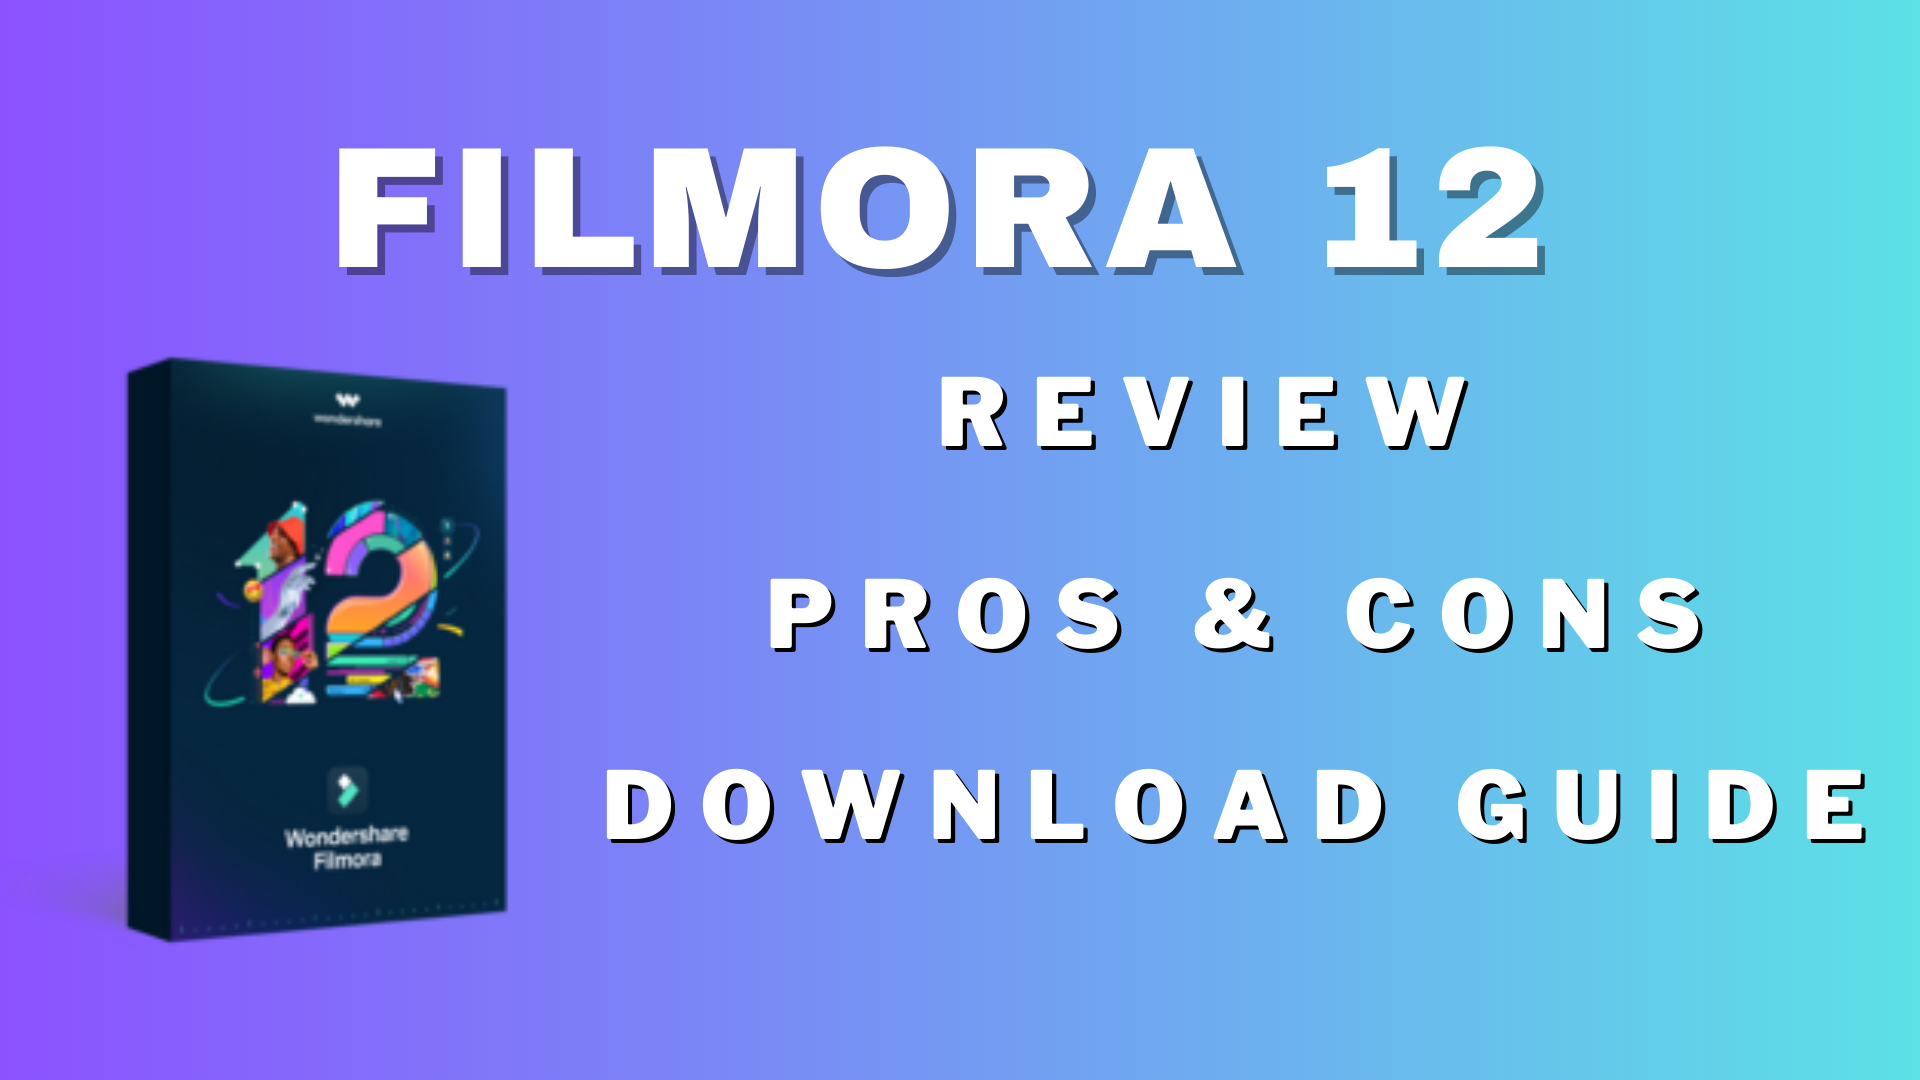 Wondershare Filmora 12 Review, Pros and Cons and Where to Download